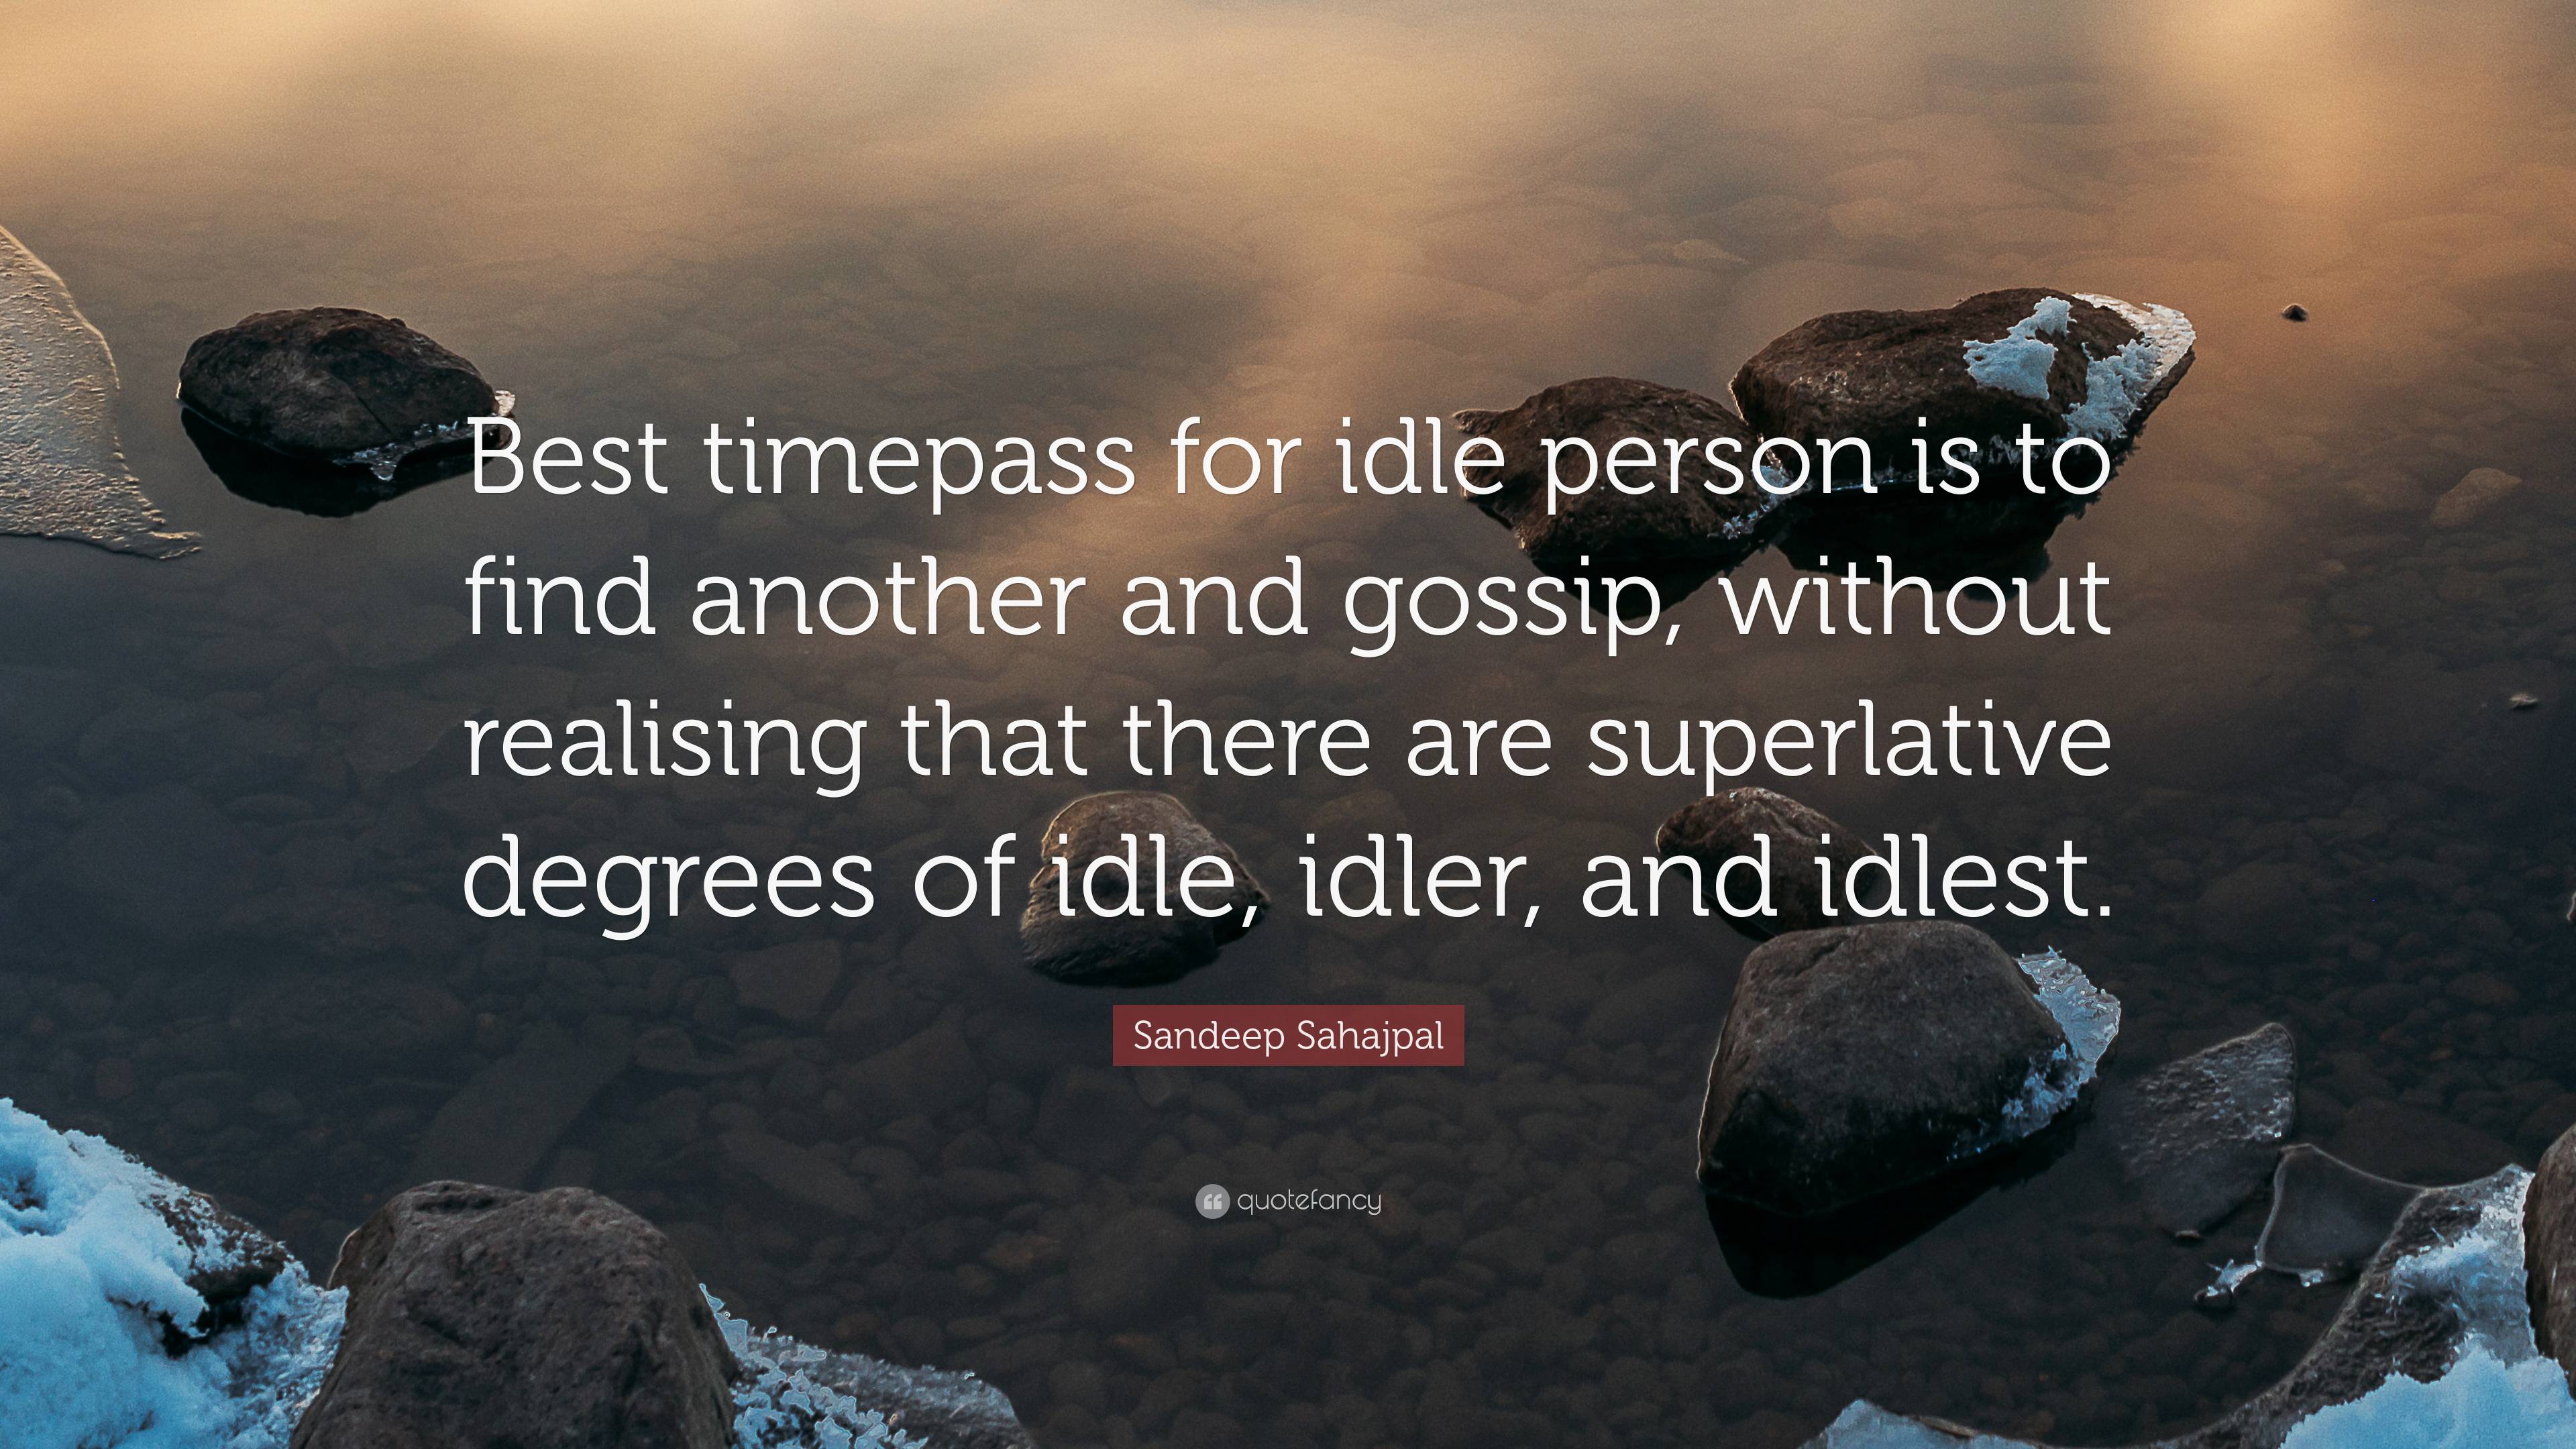 TOP 13 IDLE TIME QUOTES